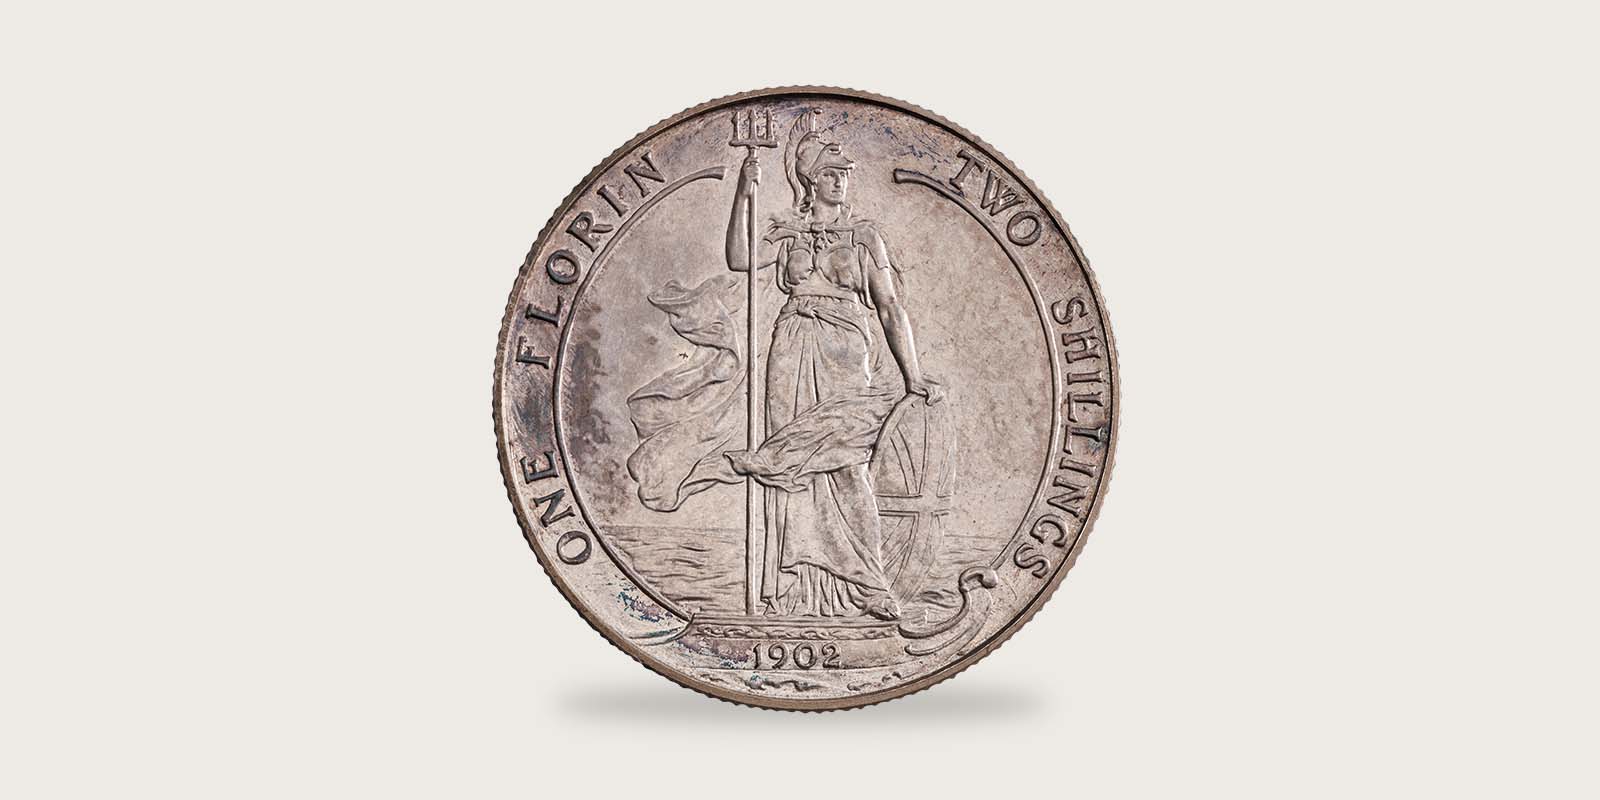 Historic Coins